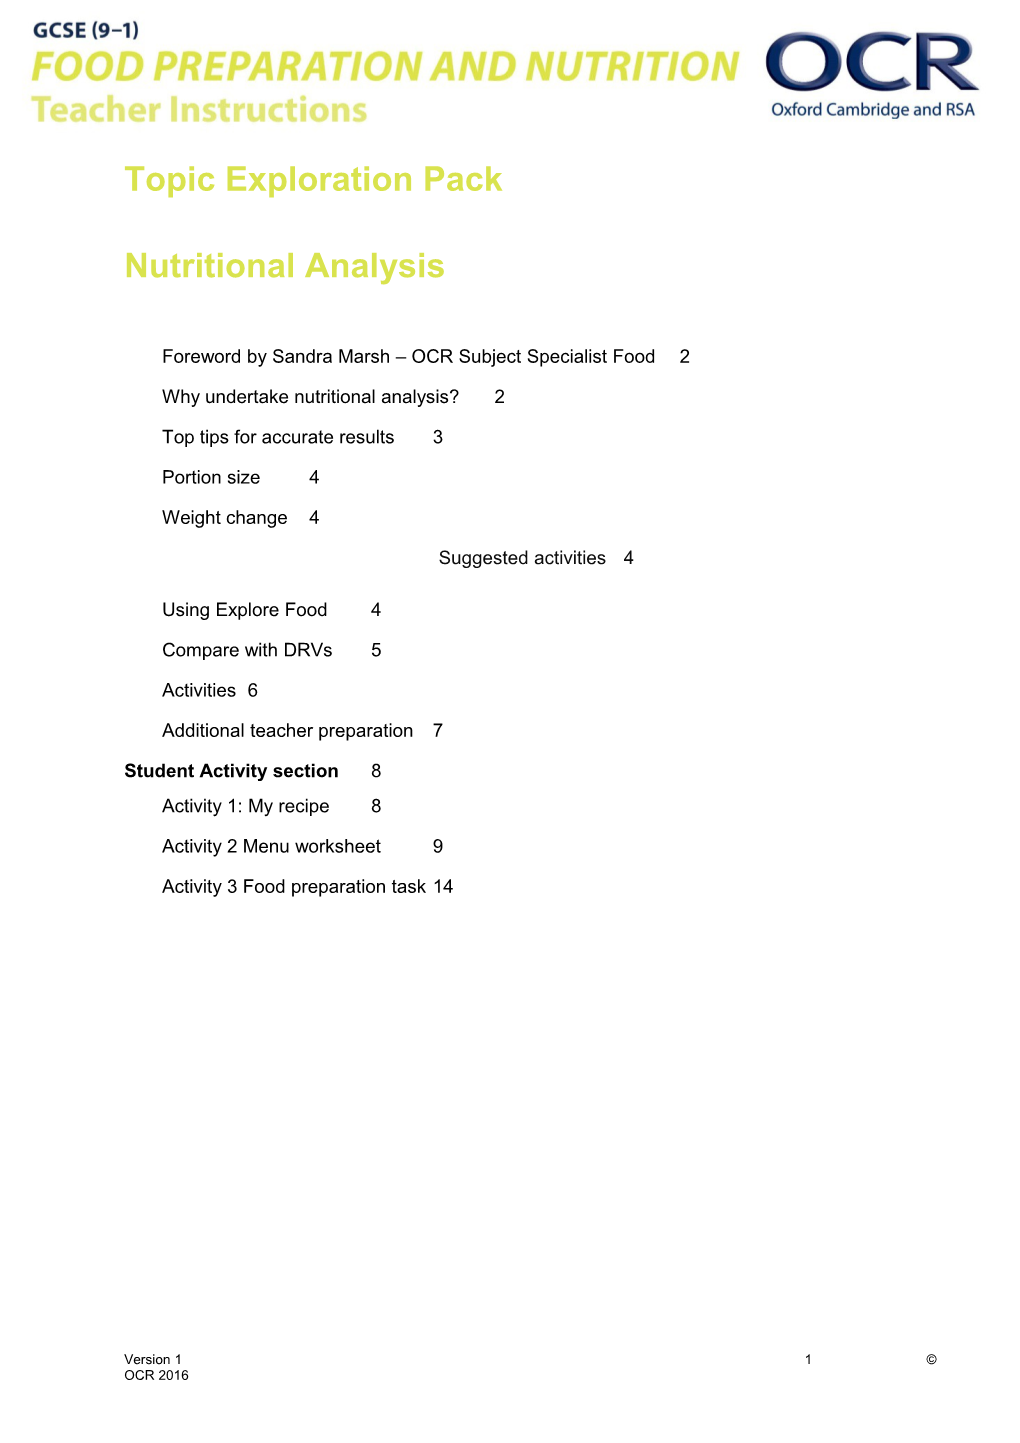 OCR GCSE (9-1) Food Preparation and Nutrition Topic Exploration Pack: Nutritional Analysis